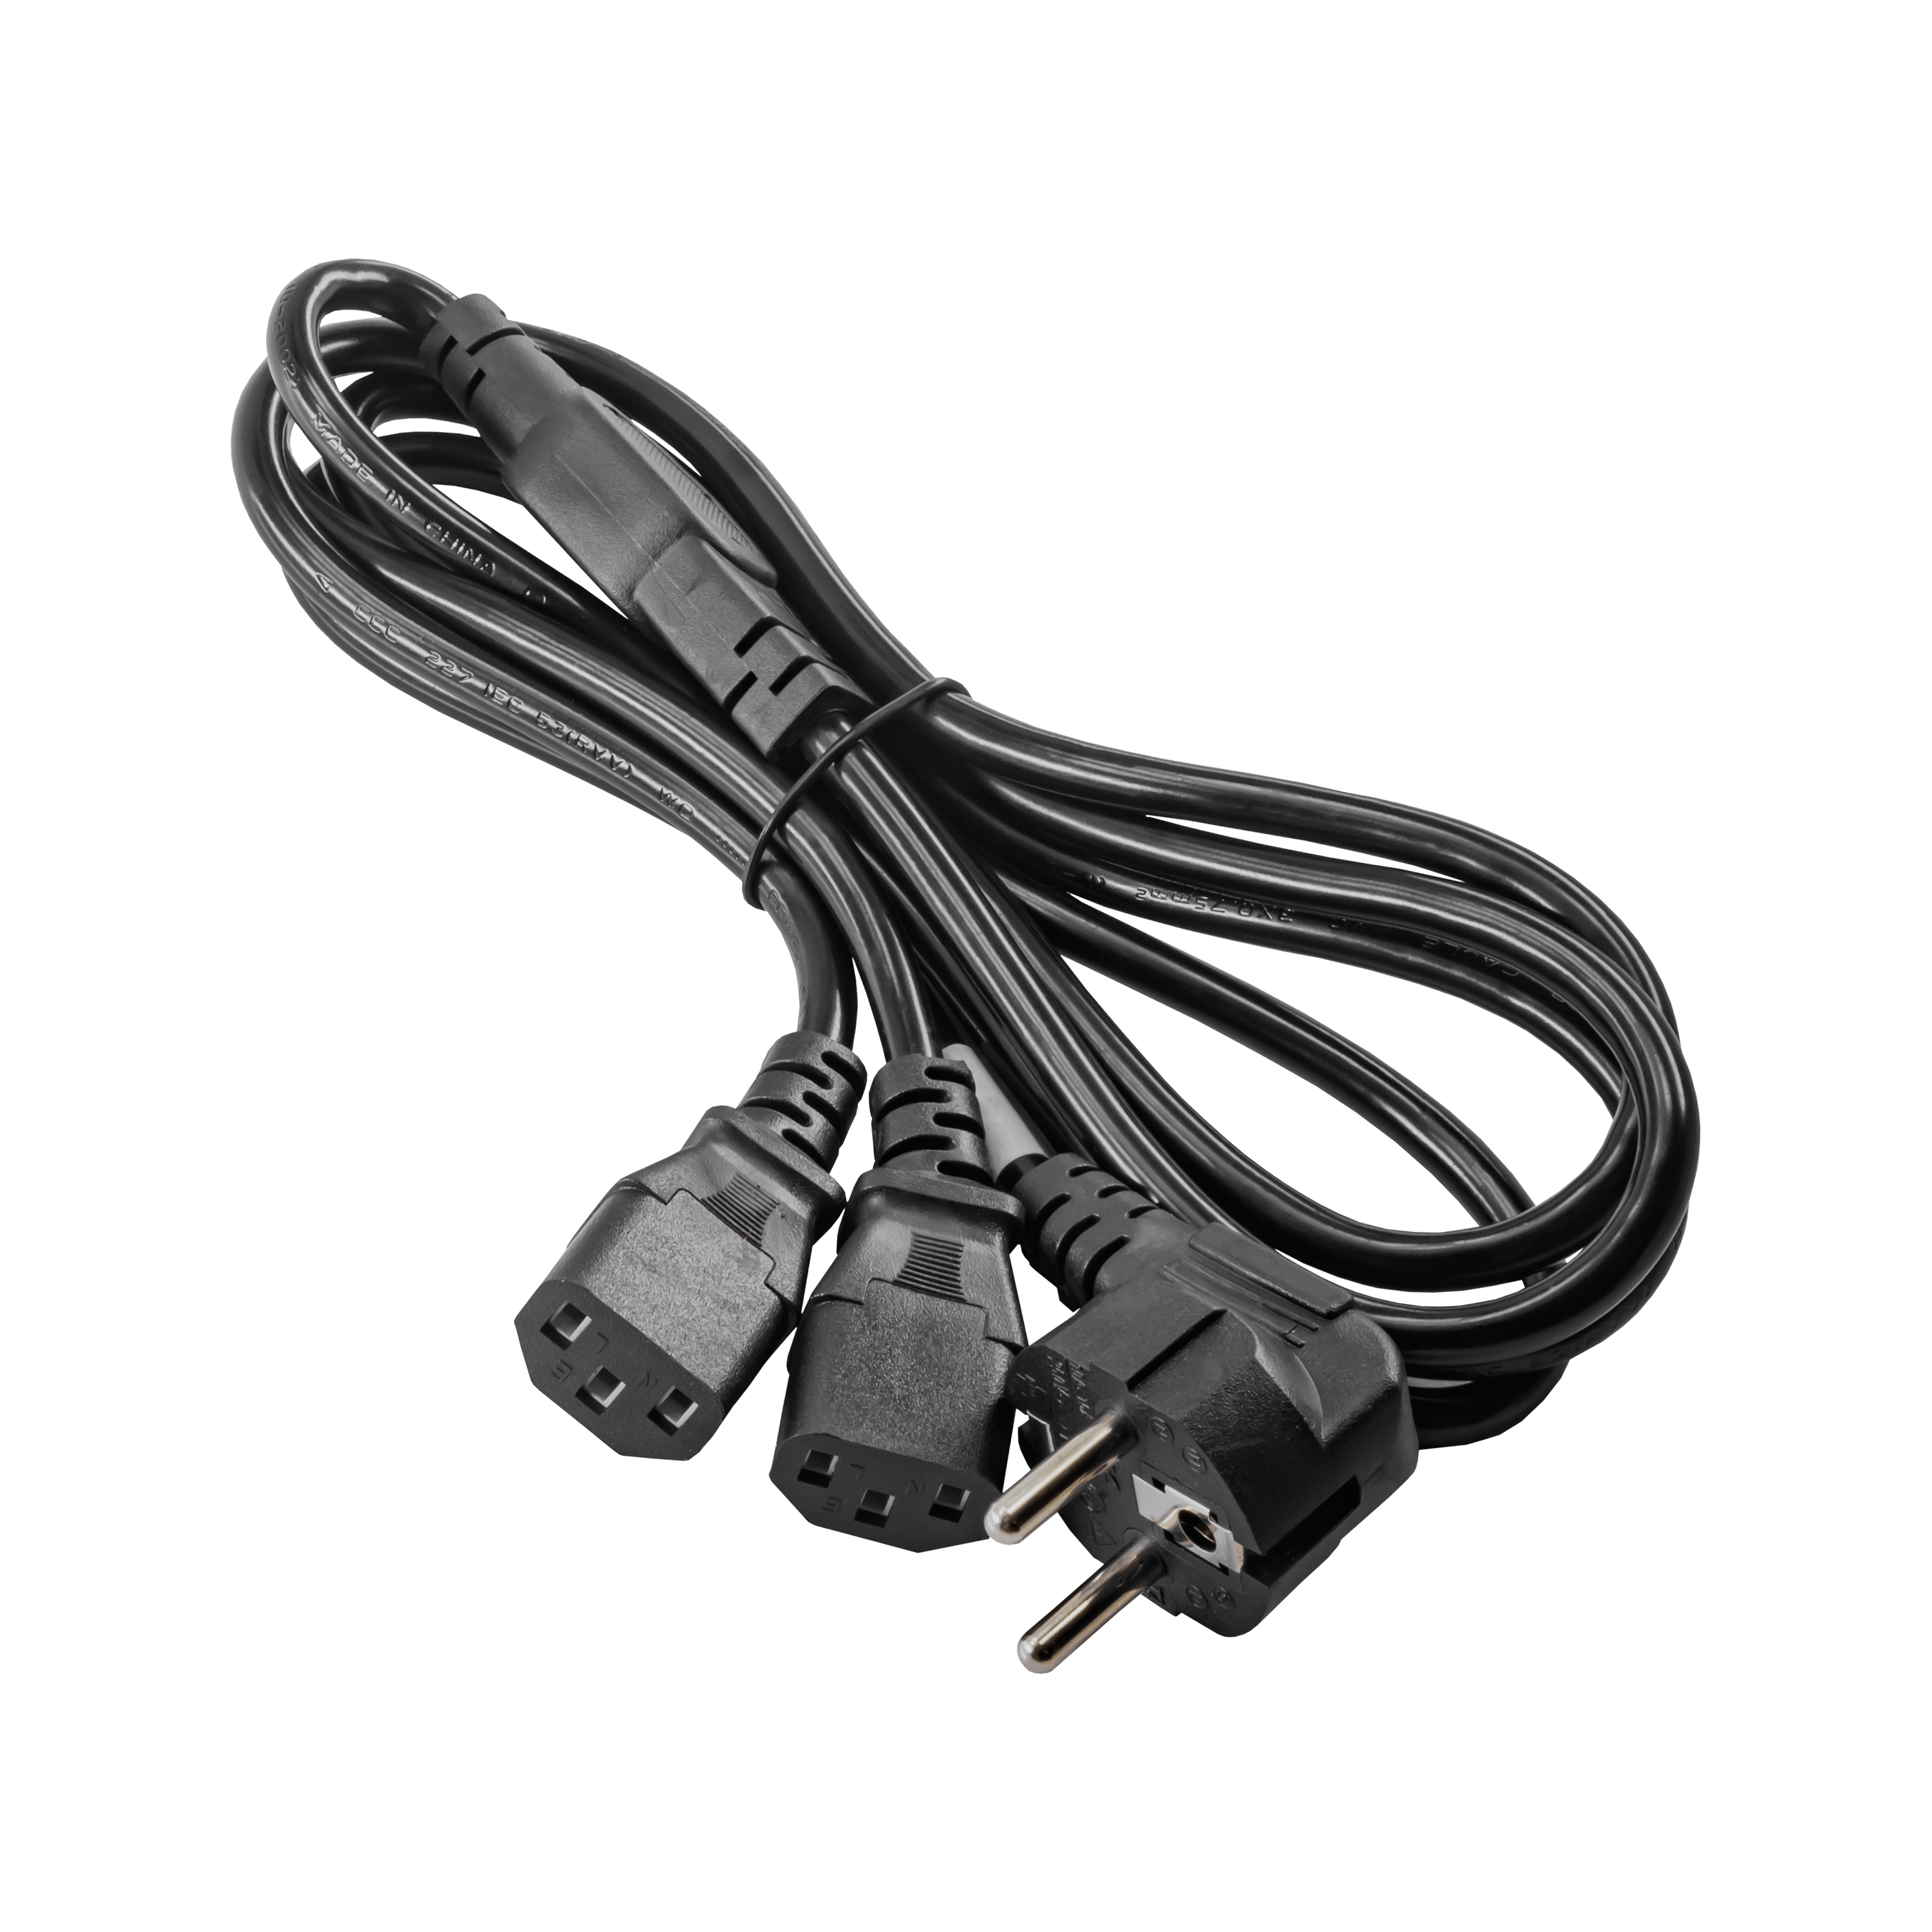 Power Cable PNG Free Image